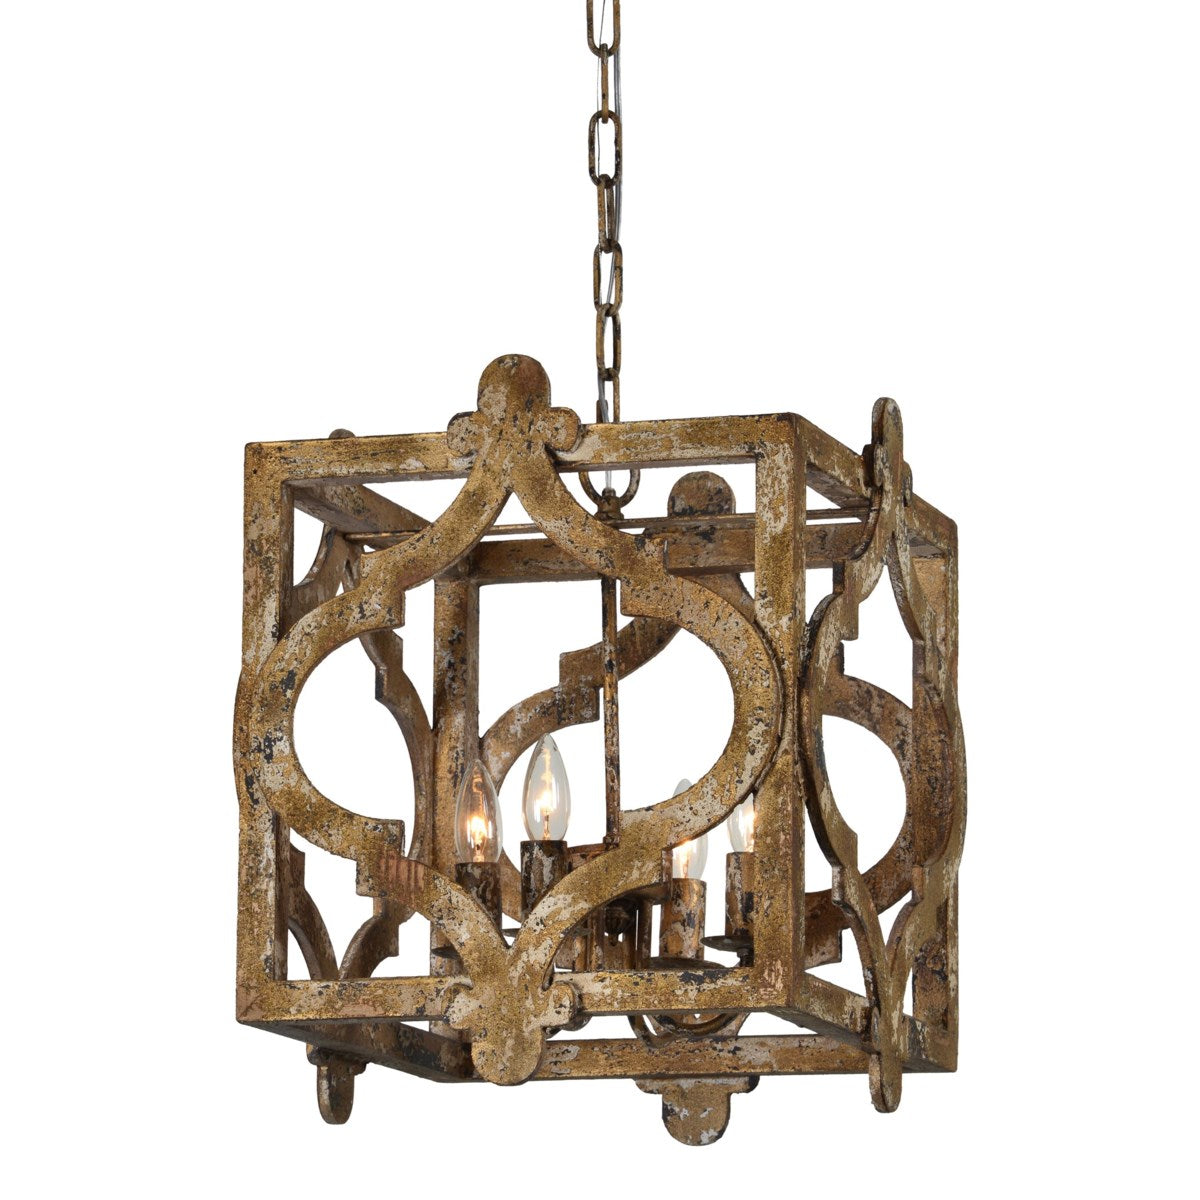 Forty West Designs 70796 Vivianne Distressed Wood and Metal Pendant Light